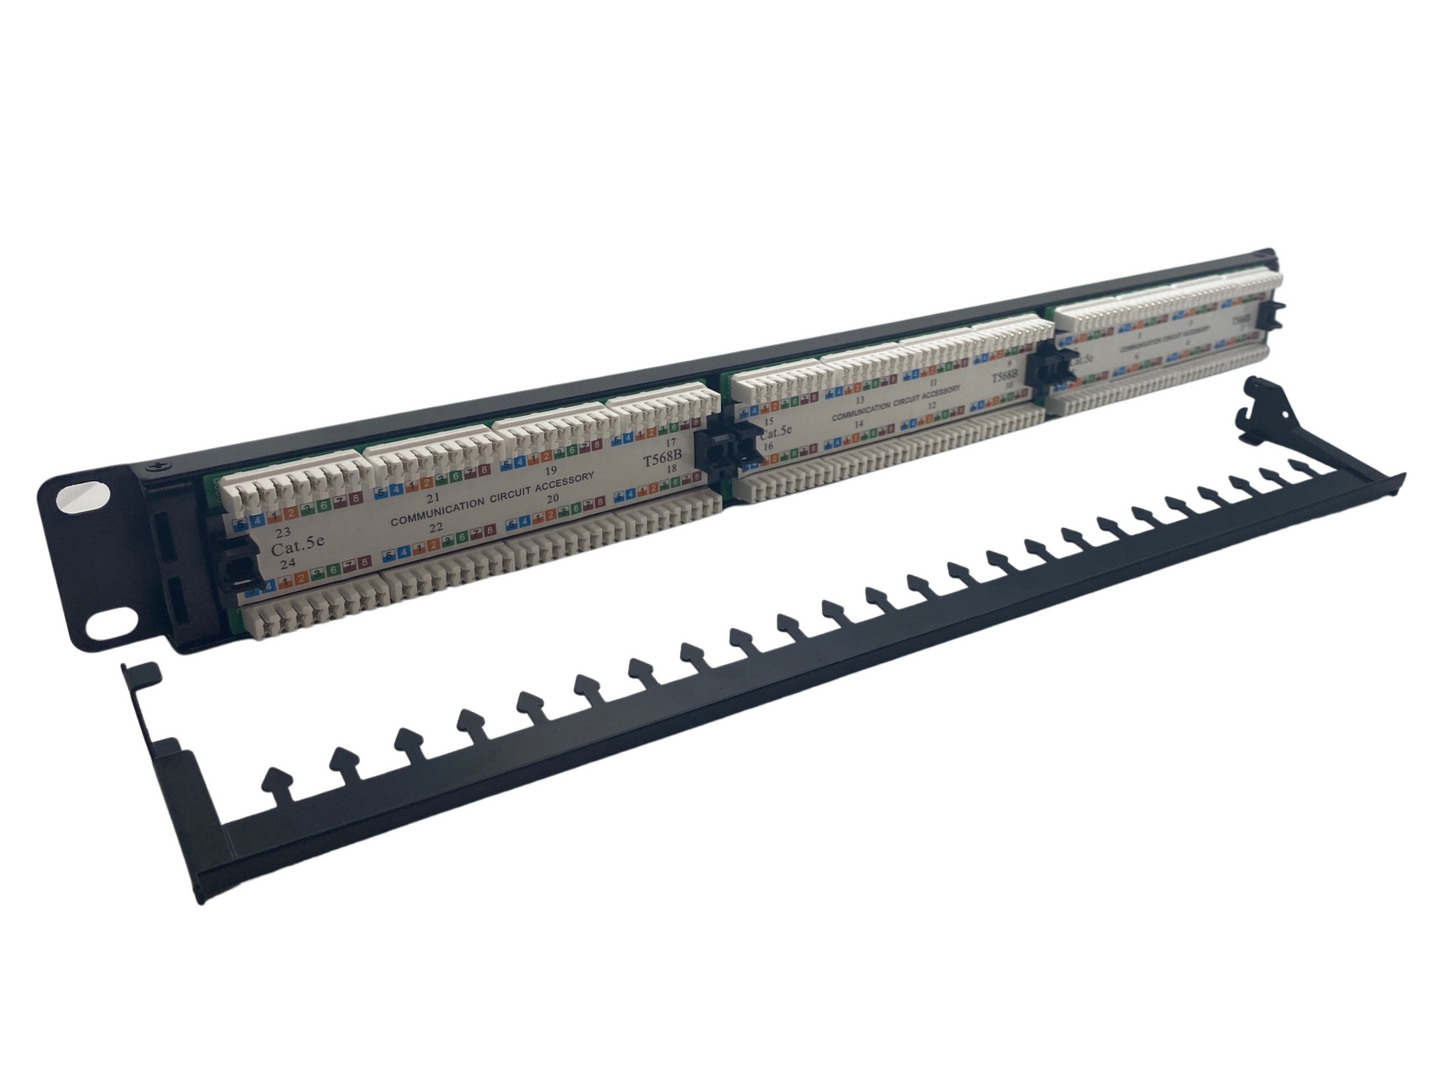 Cat 5e 24 Port 1U Patch Panel with Cable Management Cable Ties and Cage Nut Set